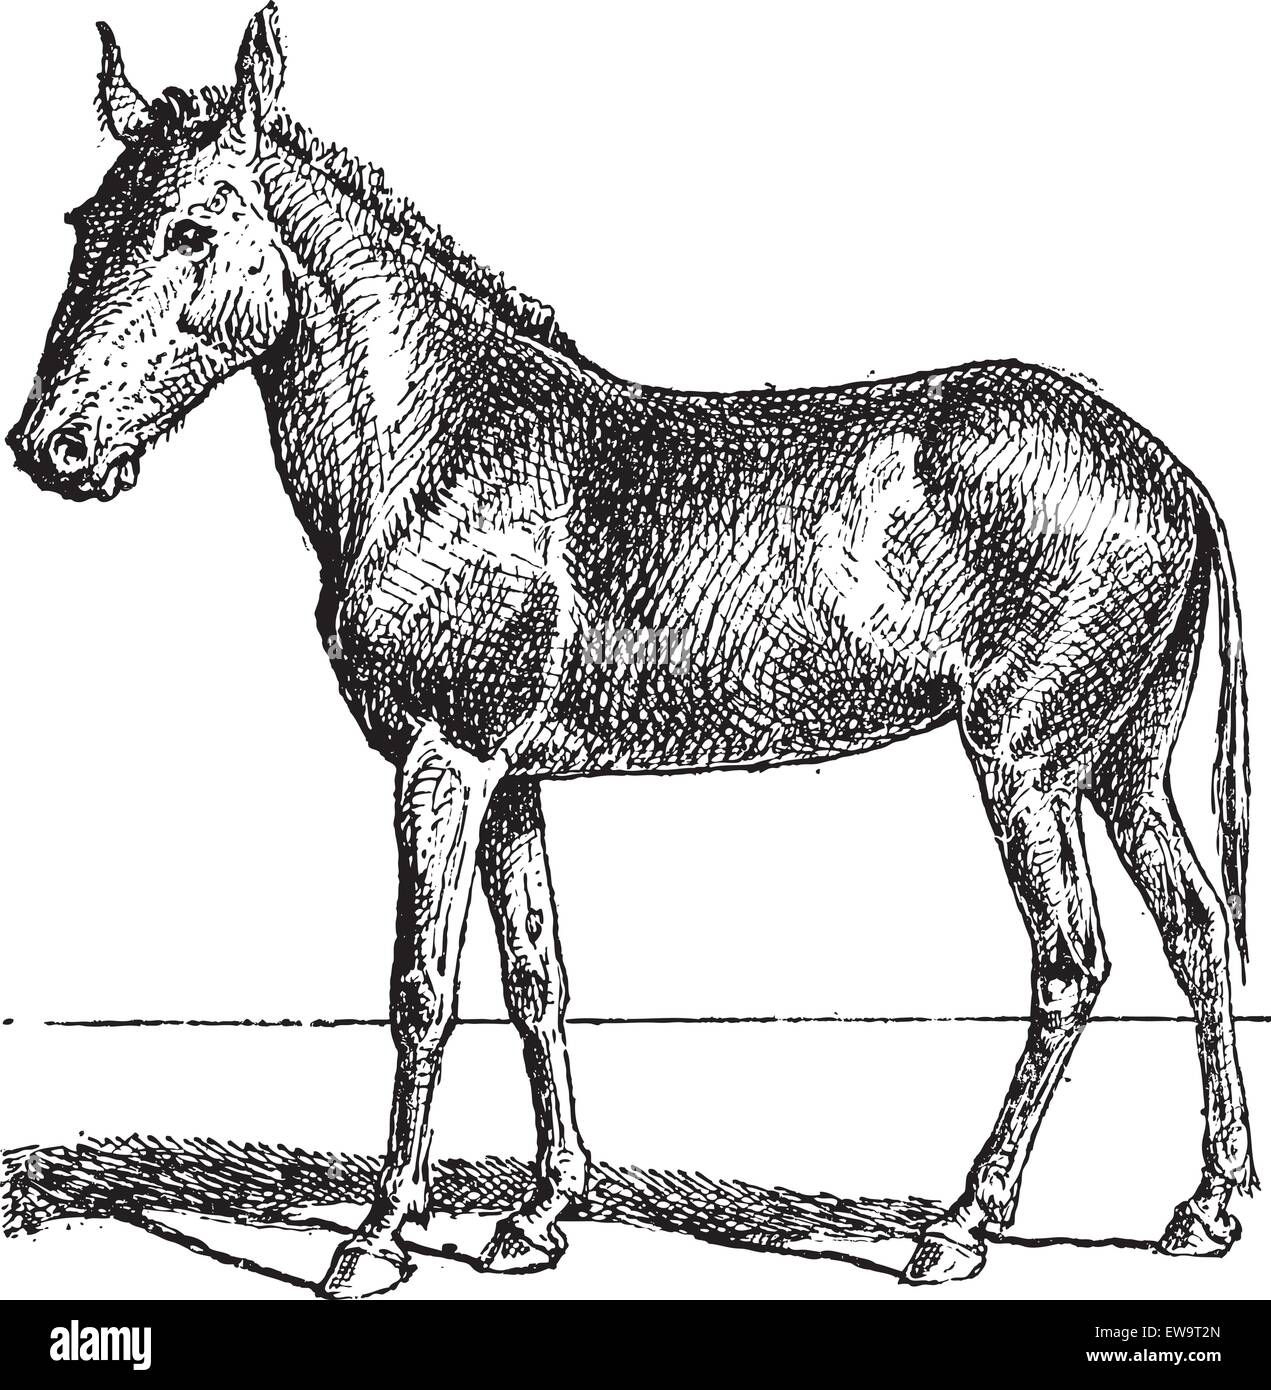 Mule or Equus mulus, vintage engraved illustration. Dictionary of Words and Things - Larive and Fleury - 1895 Stock Vector